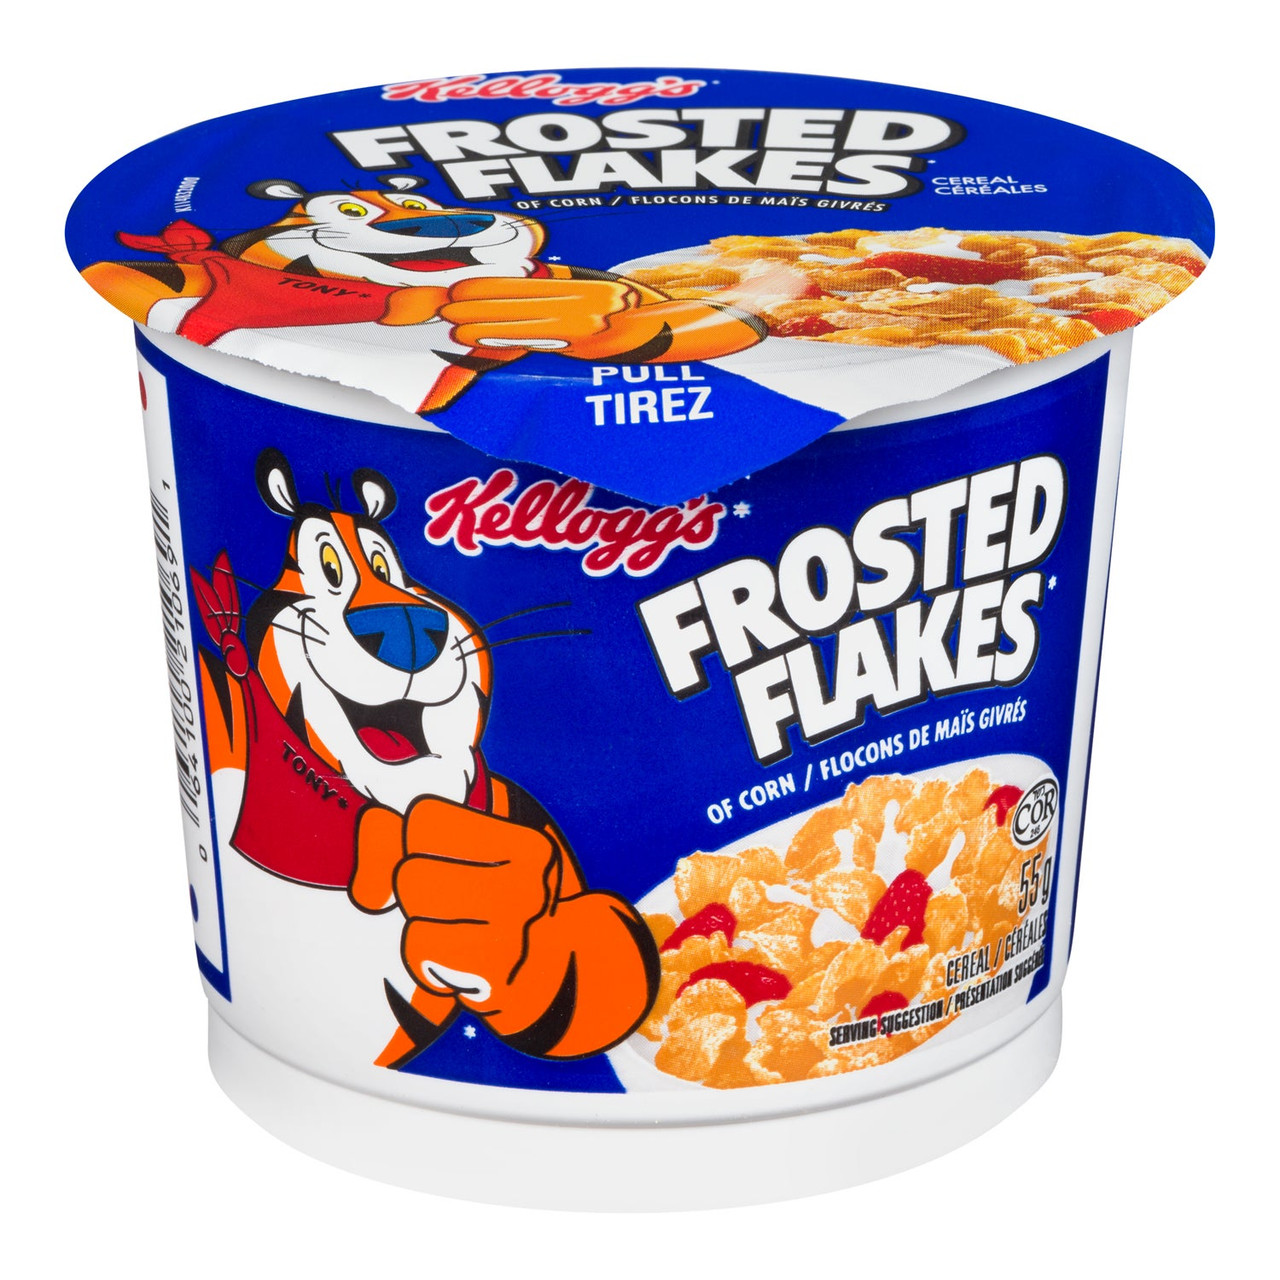 Kellogg's Frosted Flake Cereal